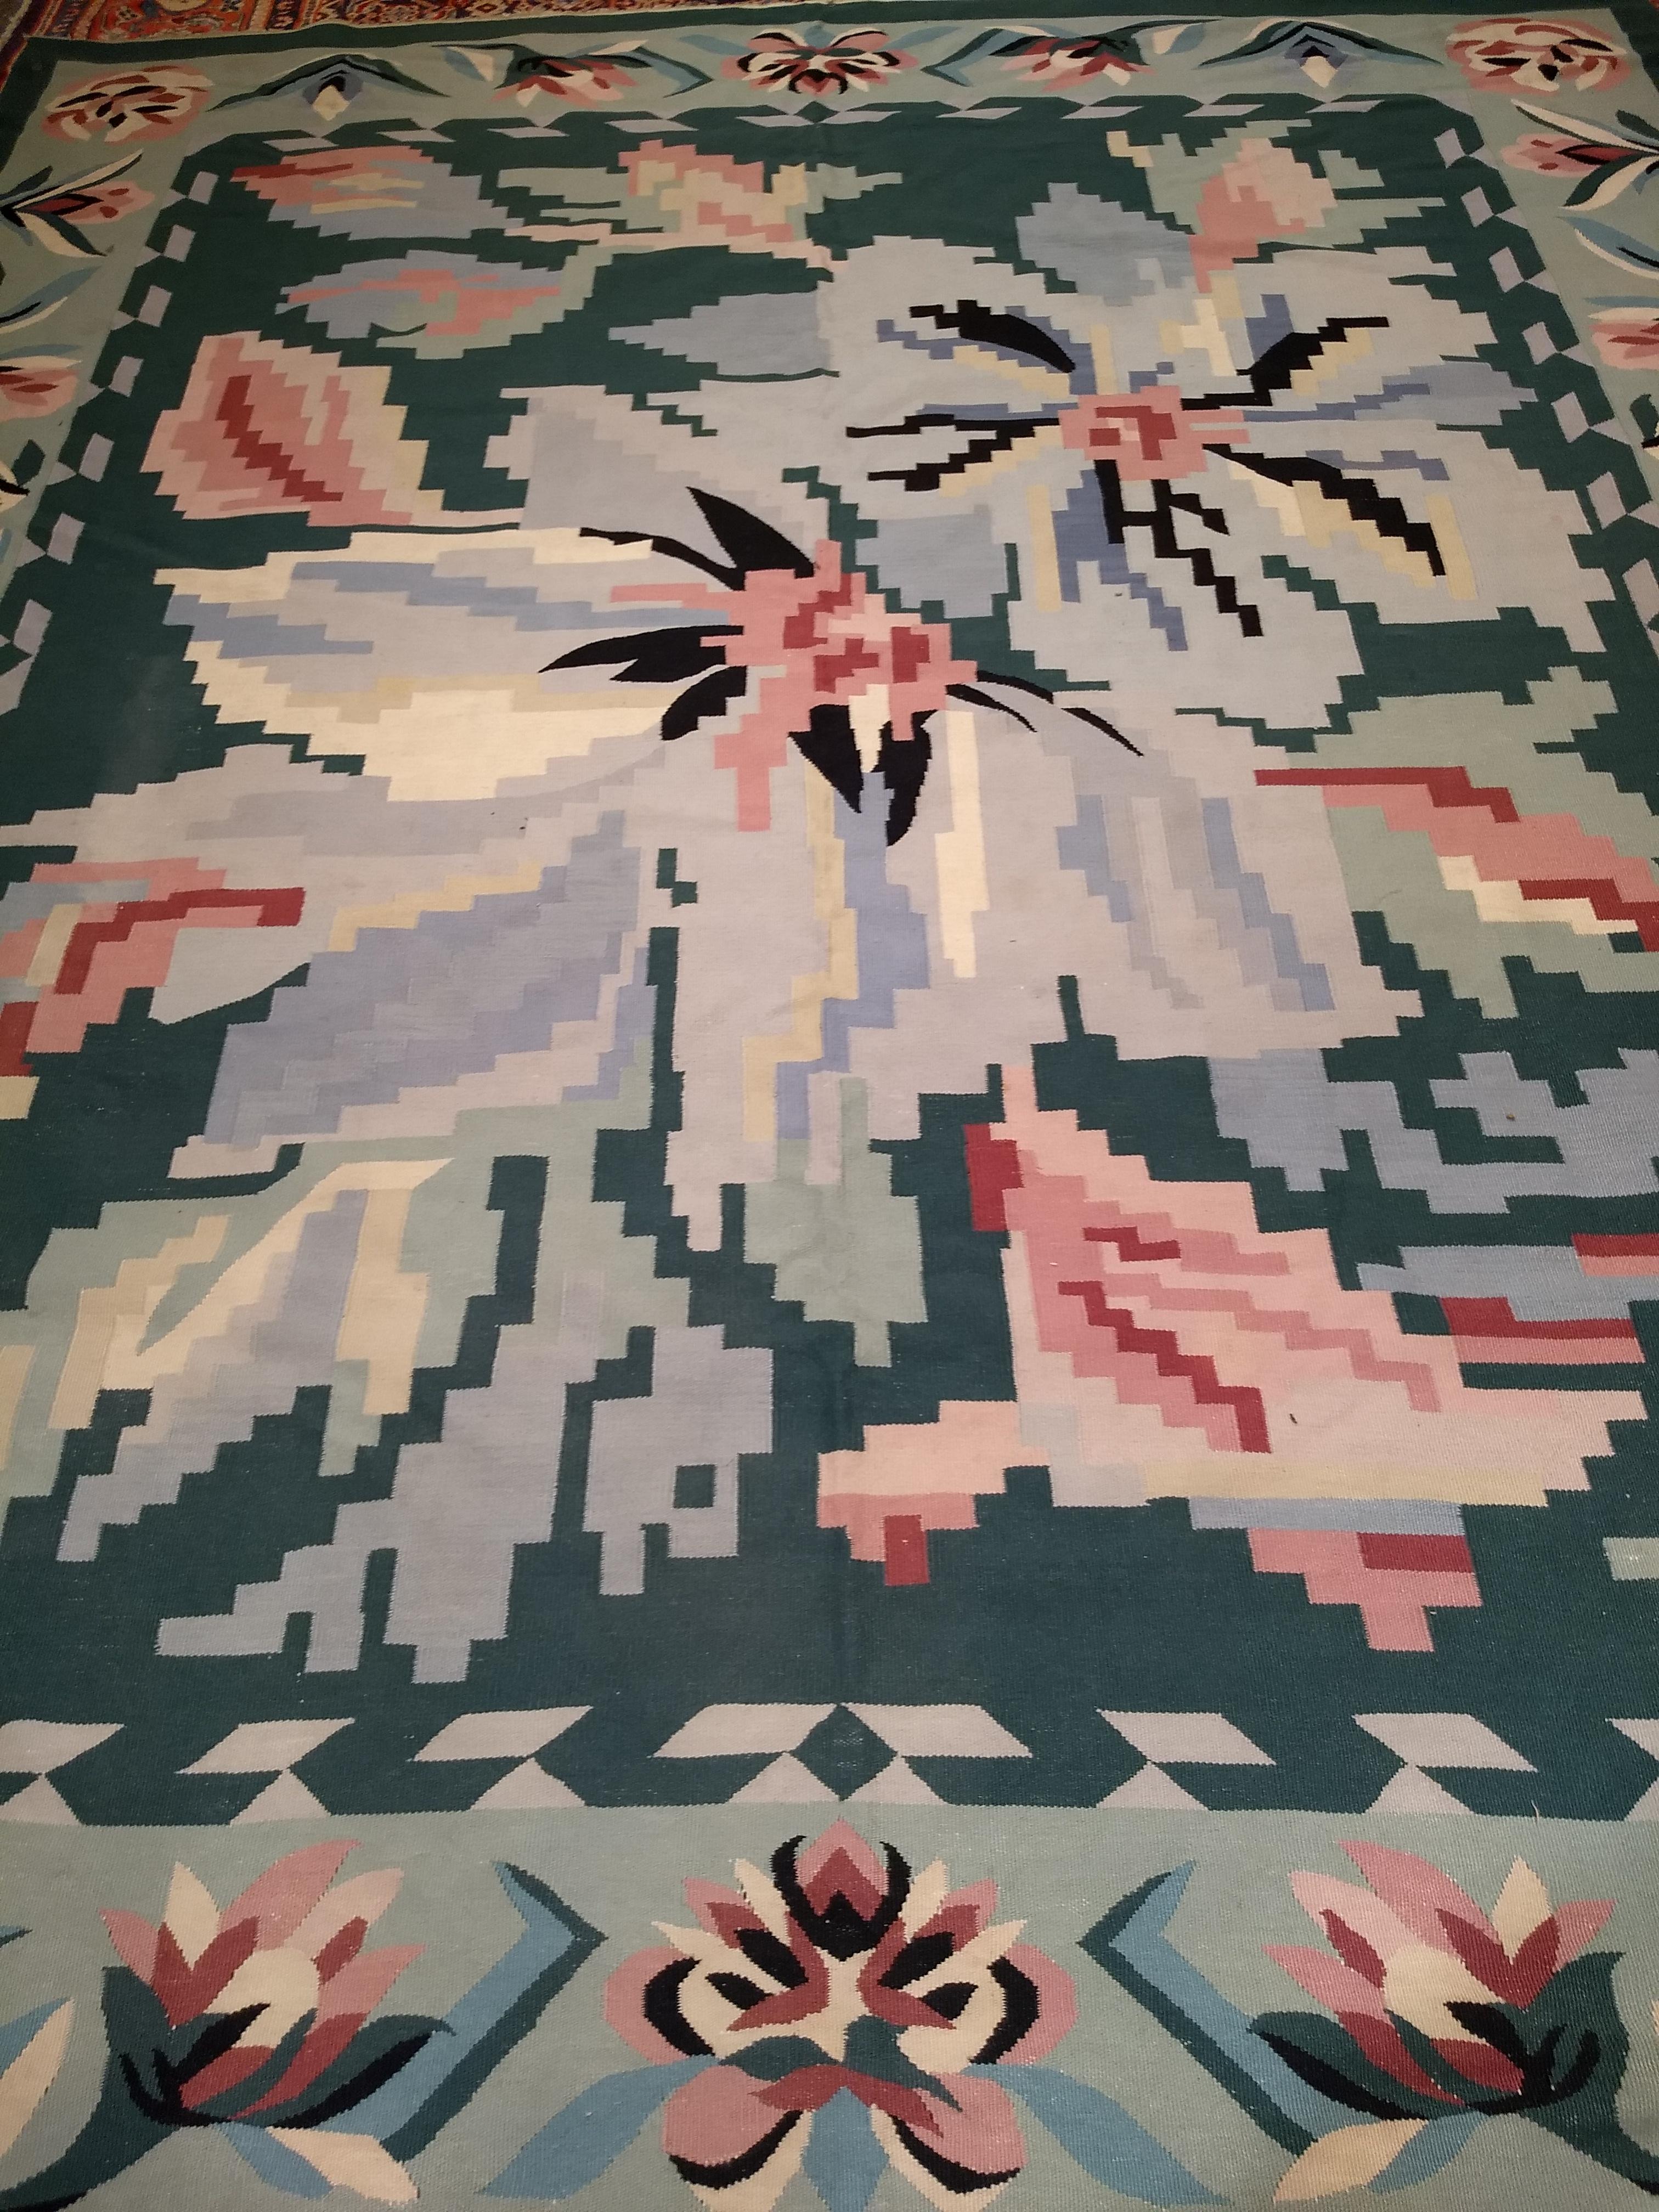 Vintage hand-woven floral dhurrie kilim in a near square room size with a beautiful combination of mid-century modern pastel colors of green, ivory, pink, and pale blue.  This Floral Kilim has a large flower design covering the main field and a